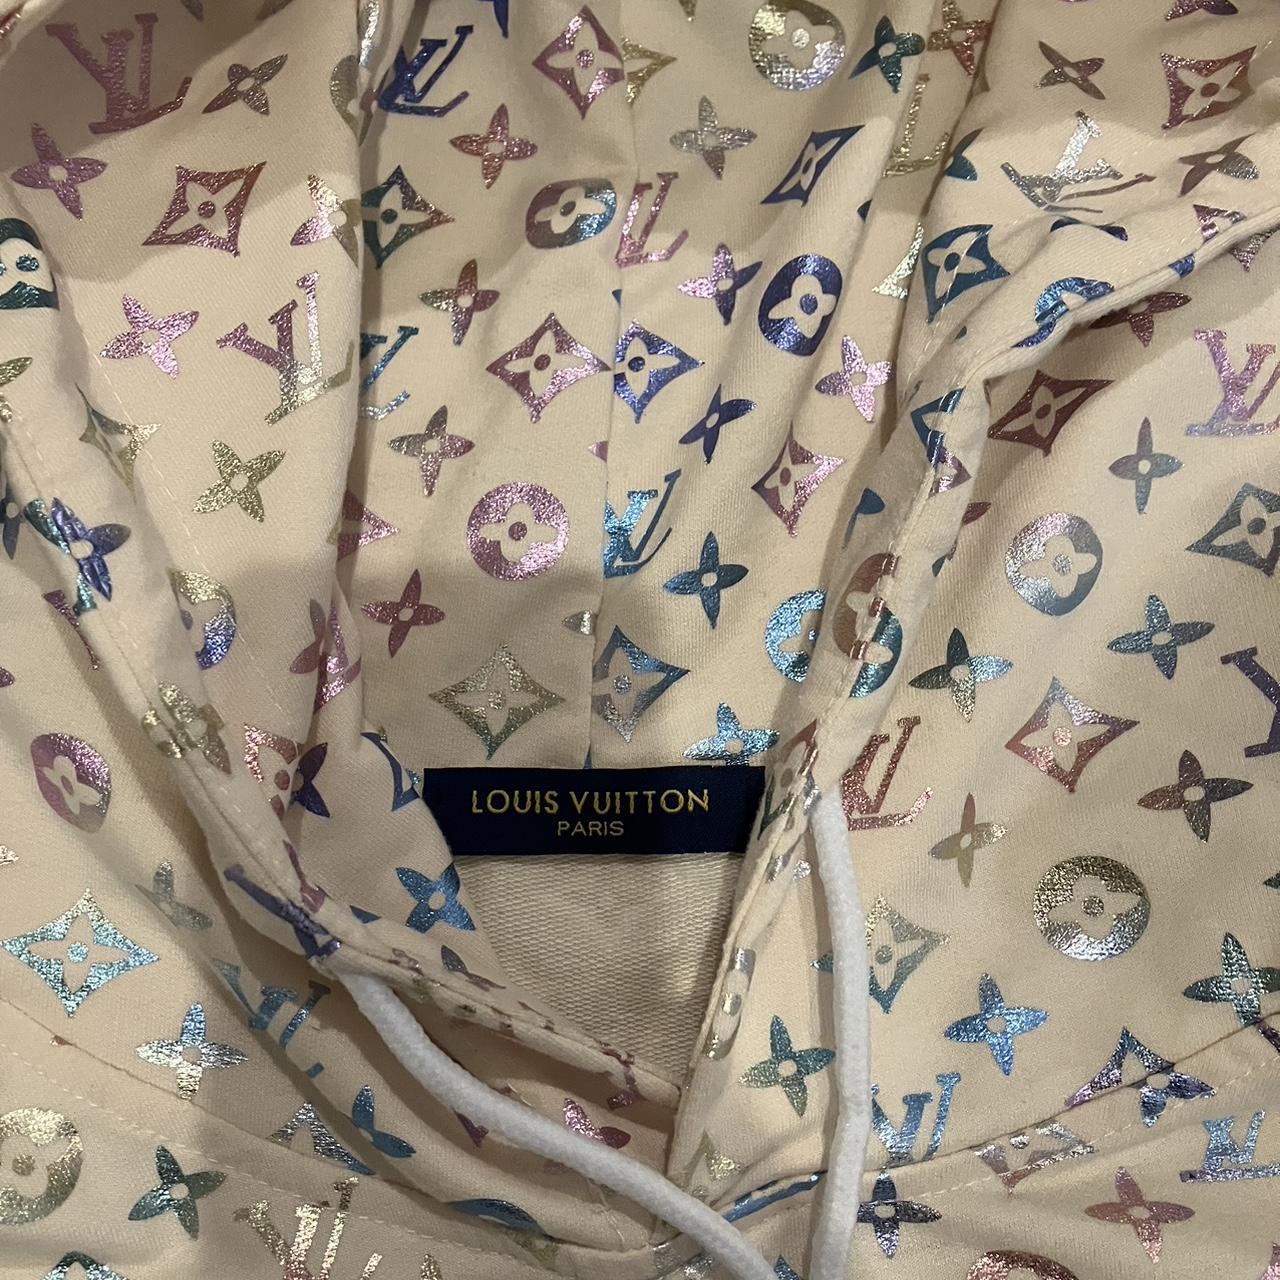 Louis Vuitton hoodie. Worn only w couple times. Been - Depop